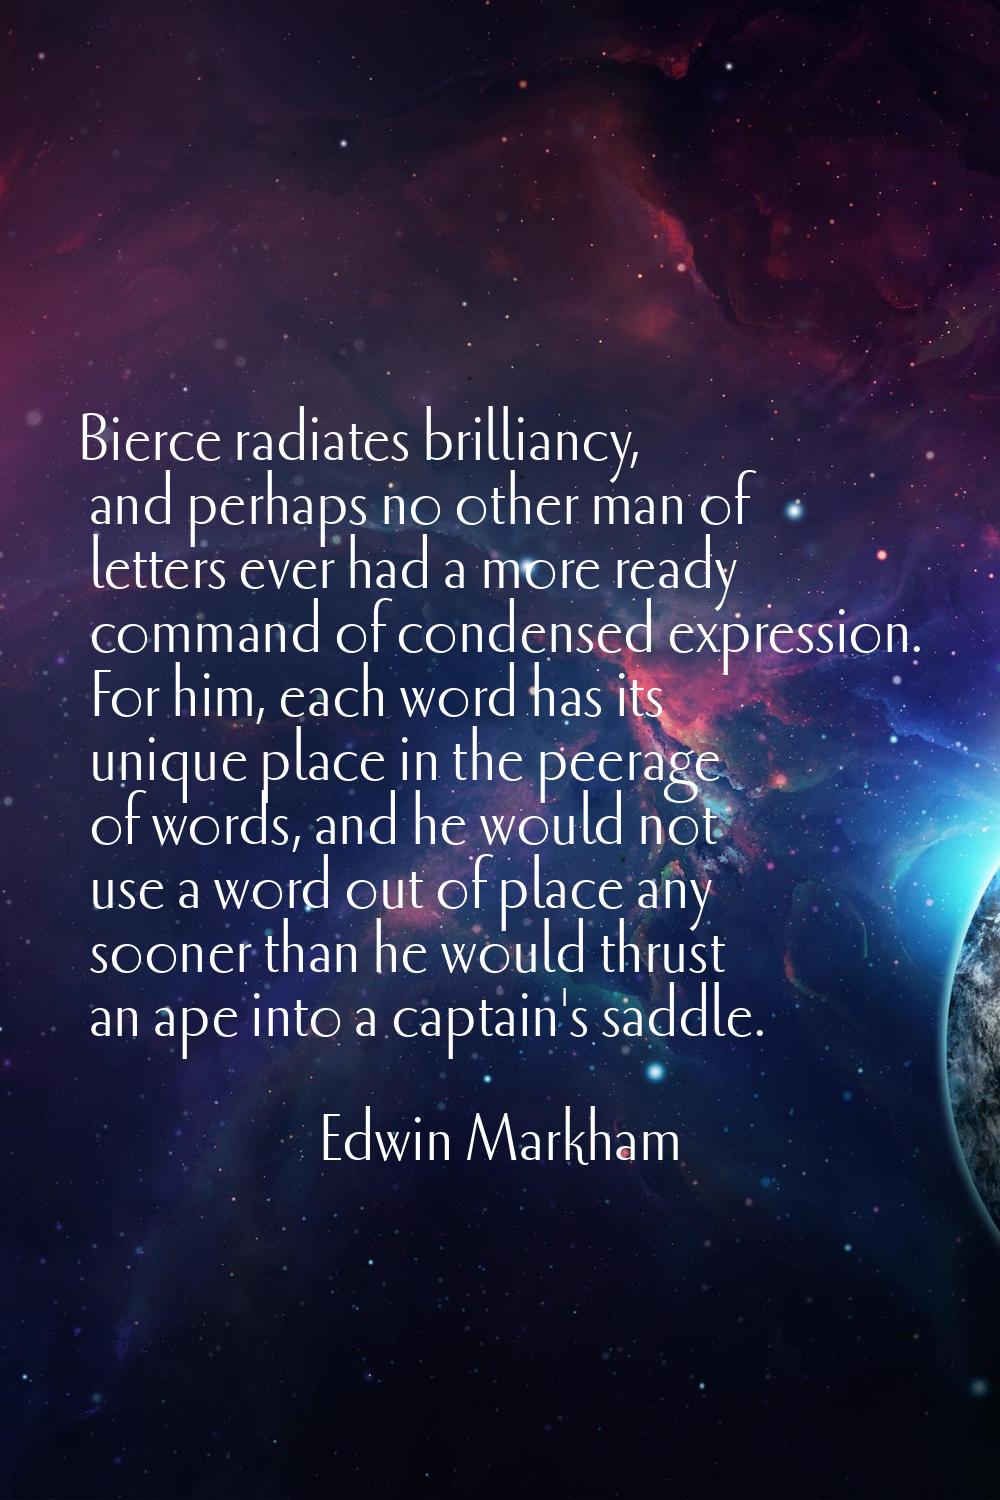 Bierce radiates brilliancy, and perhaps no other man of letters ever had a more ready command of co